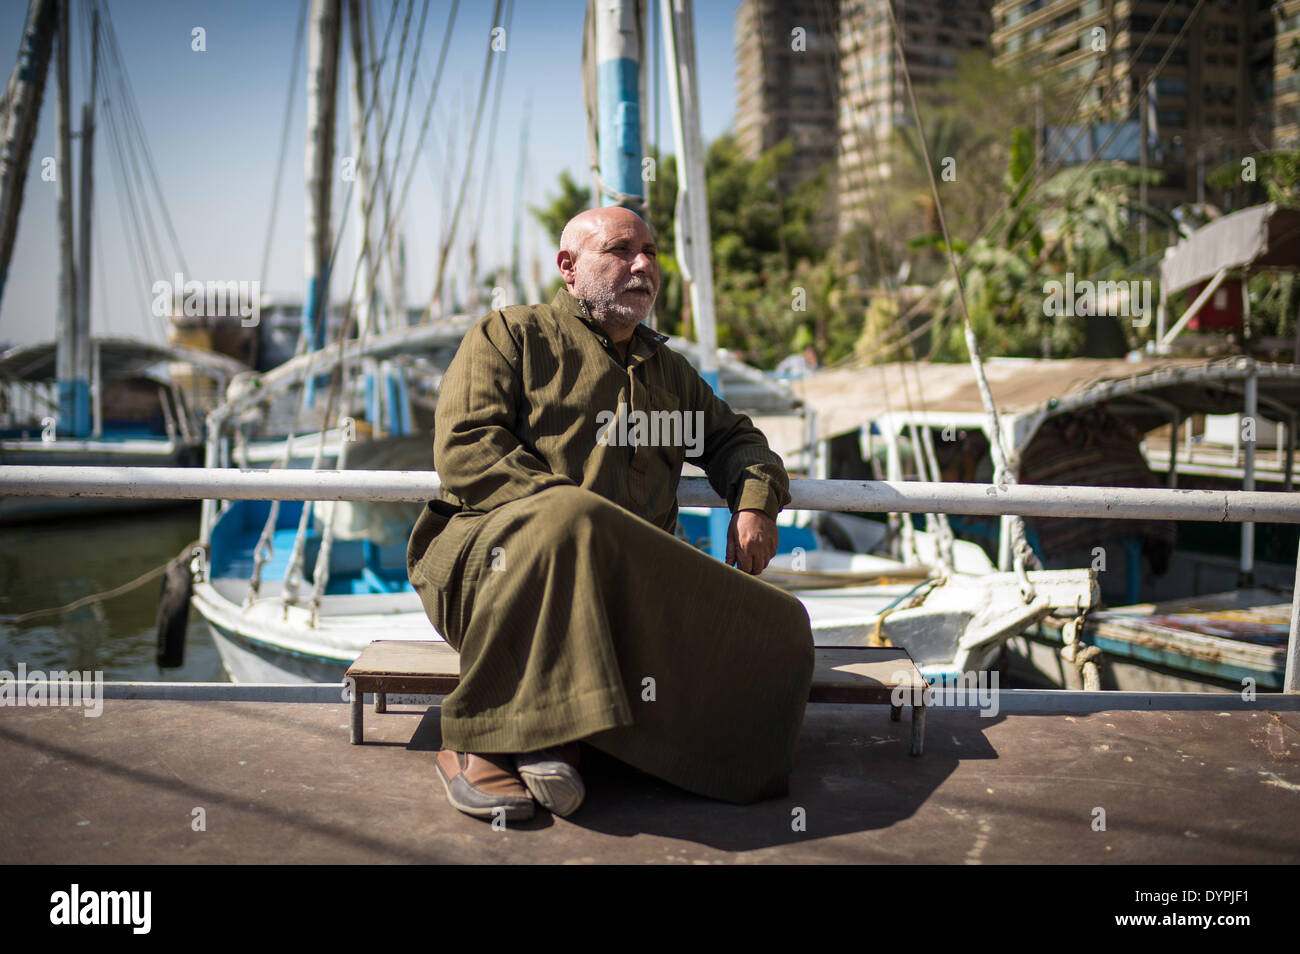 (140424) -- CAIRO, April 24, 2014 (Xinhua) -- Abdel Majid Yamama, 54, rests at a dock where he and his brother run the sailboat business by the Nile River in Maadi district, Cairo, capital of Egypt, on March 15, 2014. The Yamama family from Giza has lived on the Nile River for nearly one century. Presently Abdel Majid and his brother Abed Rabbo run the sailboat business for tourists at a dock in Maadi district of Cairo. The Yamama brothers and the boatmen they hire have seen a dramatic drop on business as a result of the depression in tourism since 2011, when the Revolution began throughout th Stock Photo